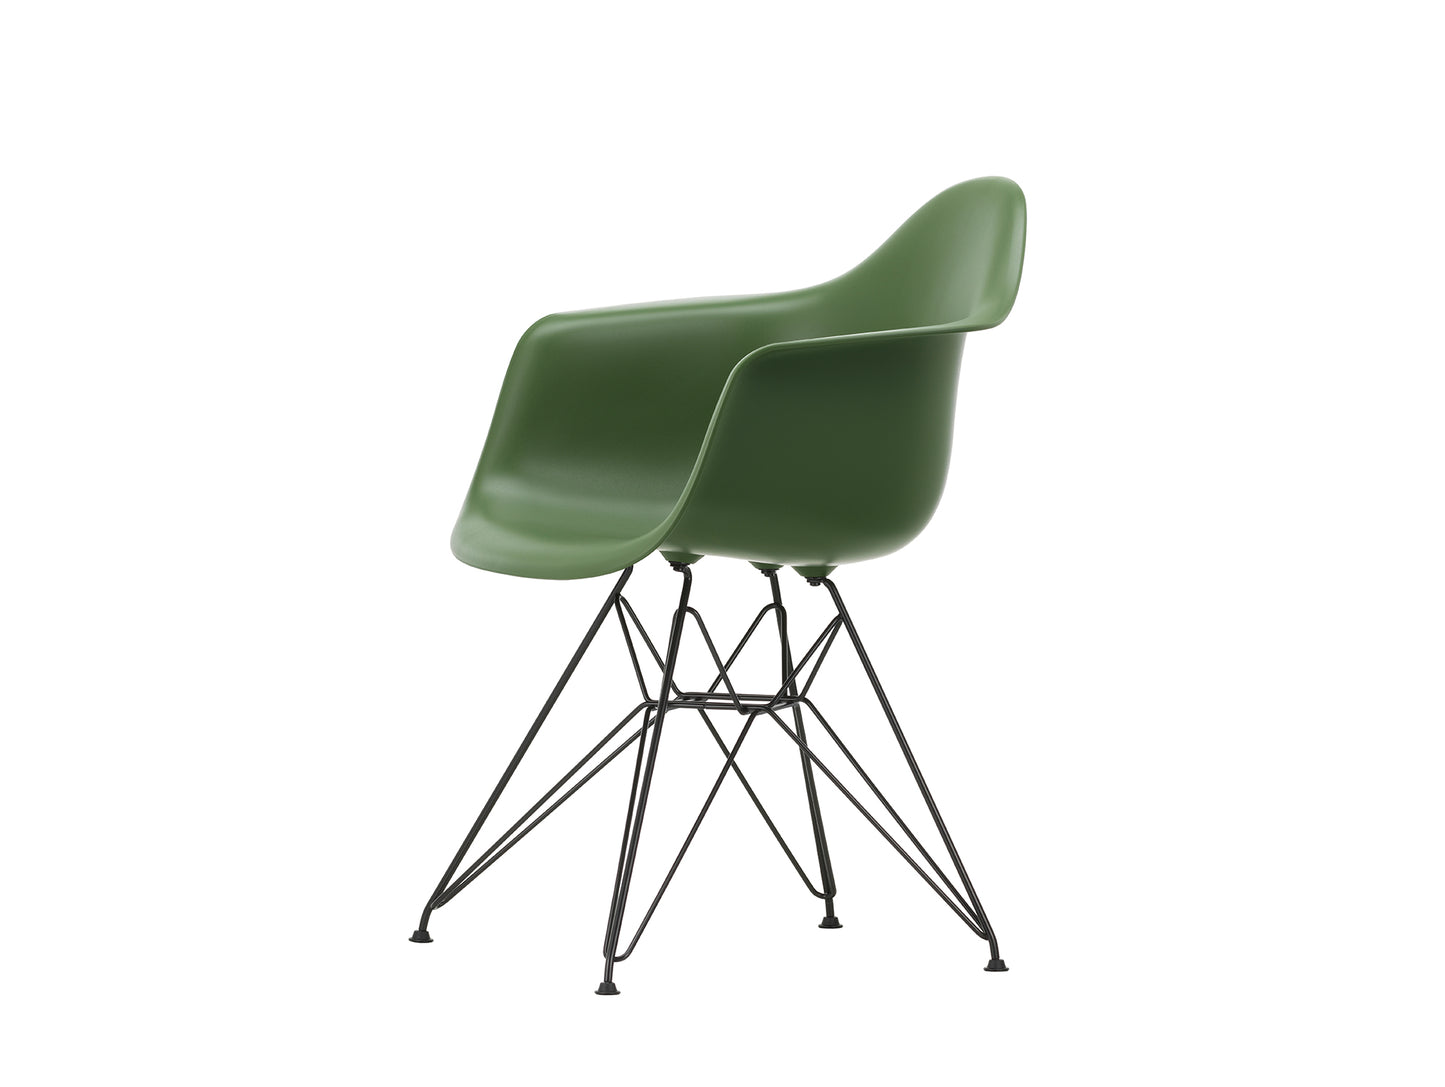 Eames DAR Plastic Armchair RE by Vitra - 48 Forest Shell / Basic Dark Base